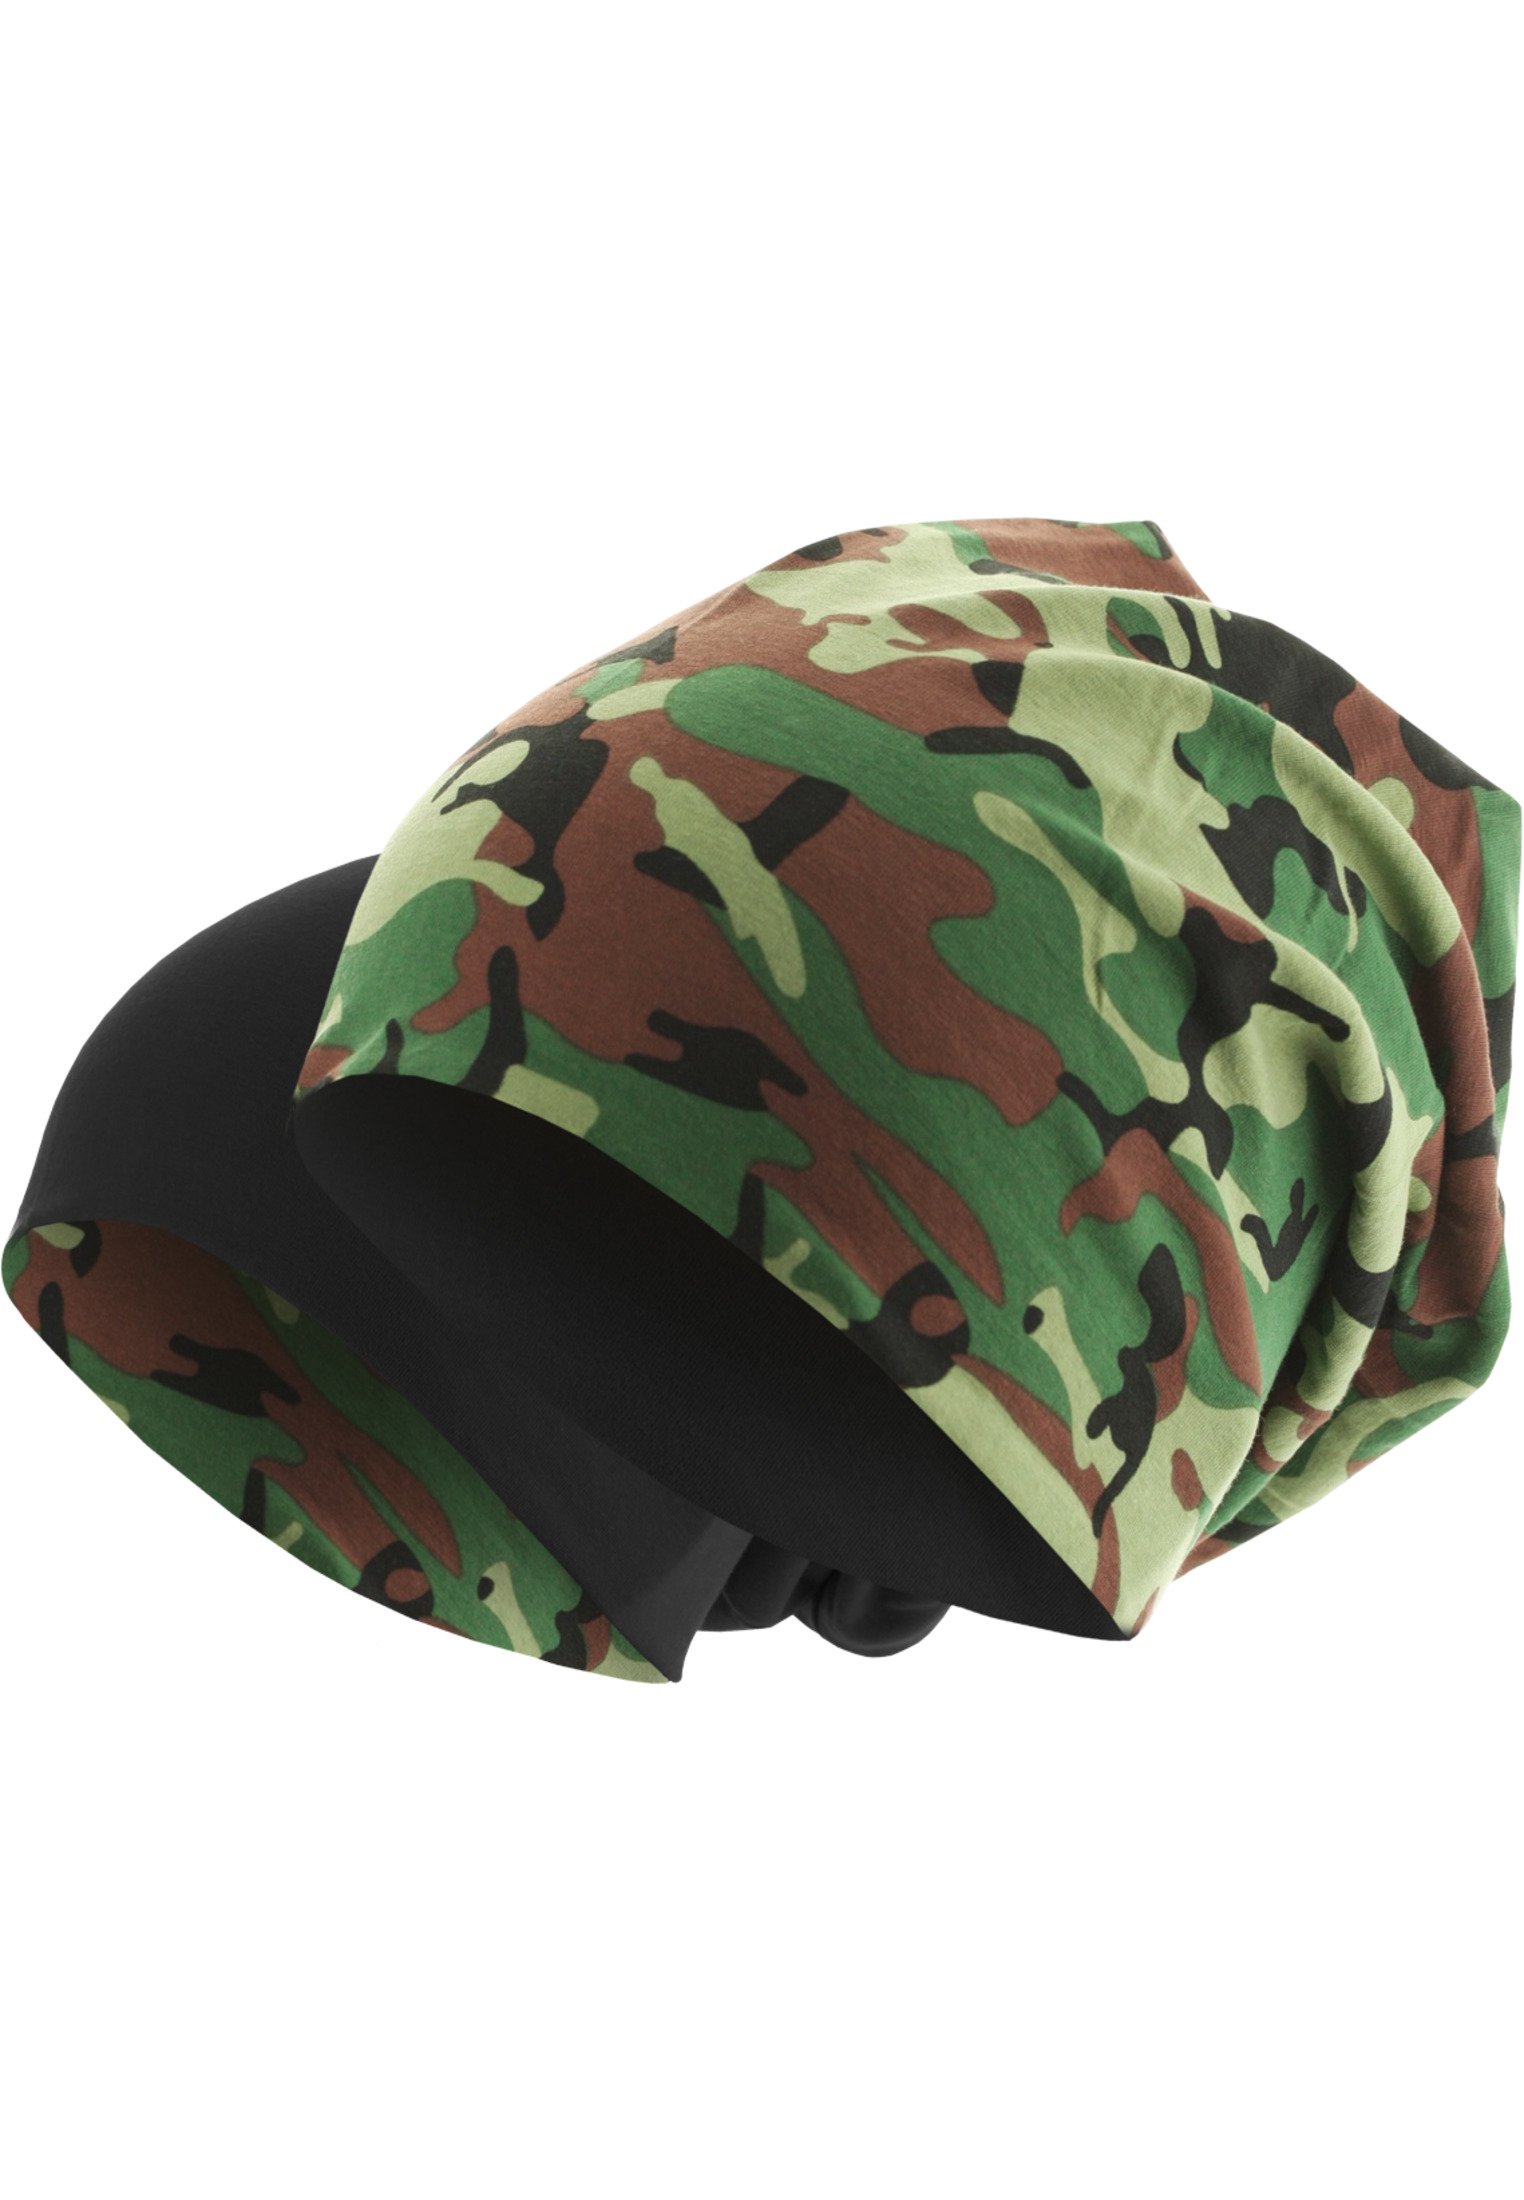 Printed Jersey Beanie green camo/black one size